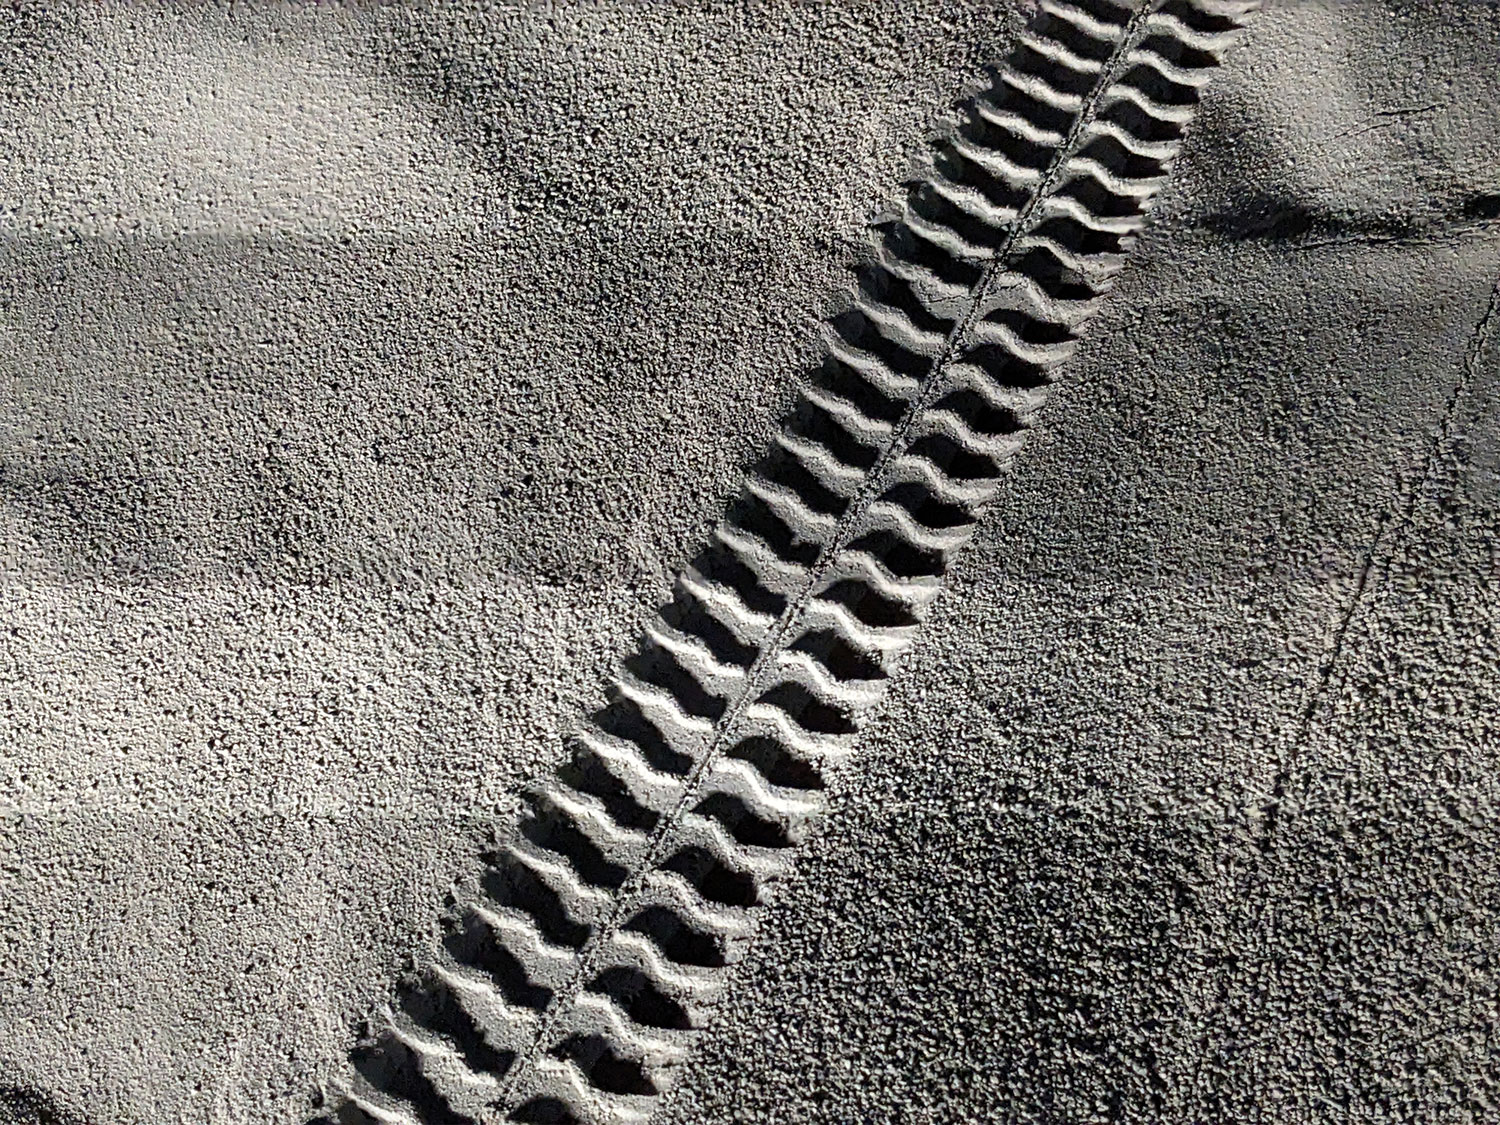 A robotic rover created tread marks in simulated lunar regolith.